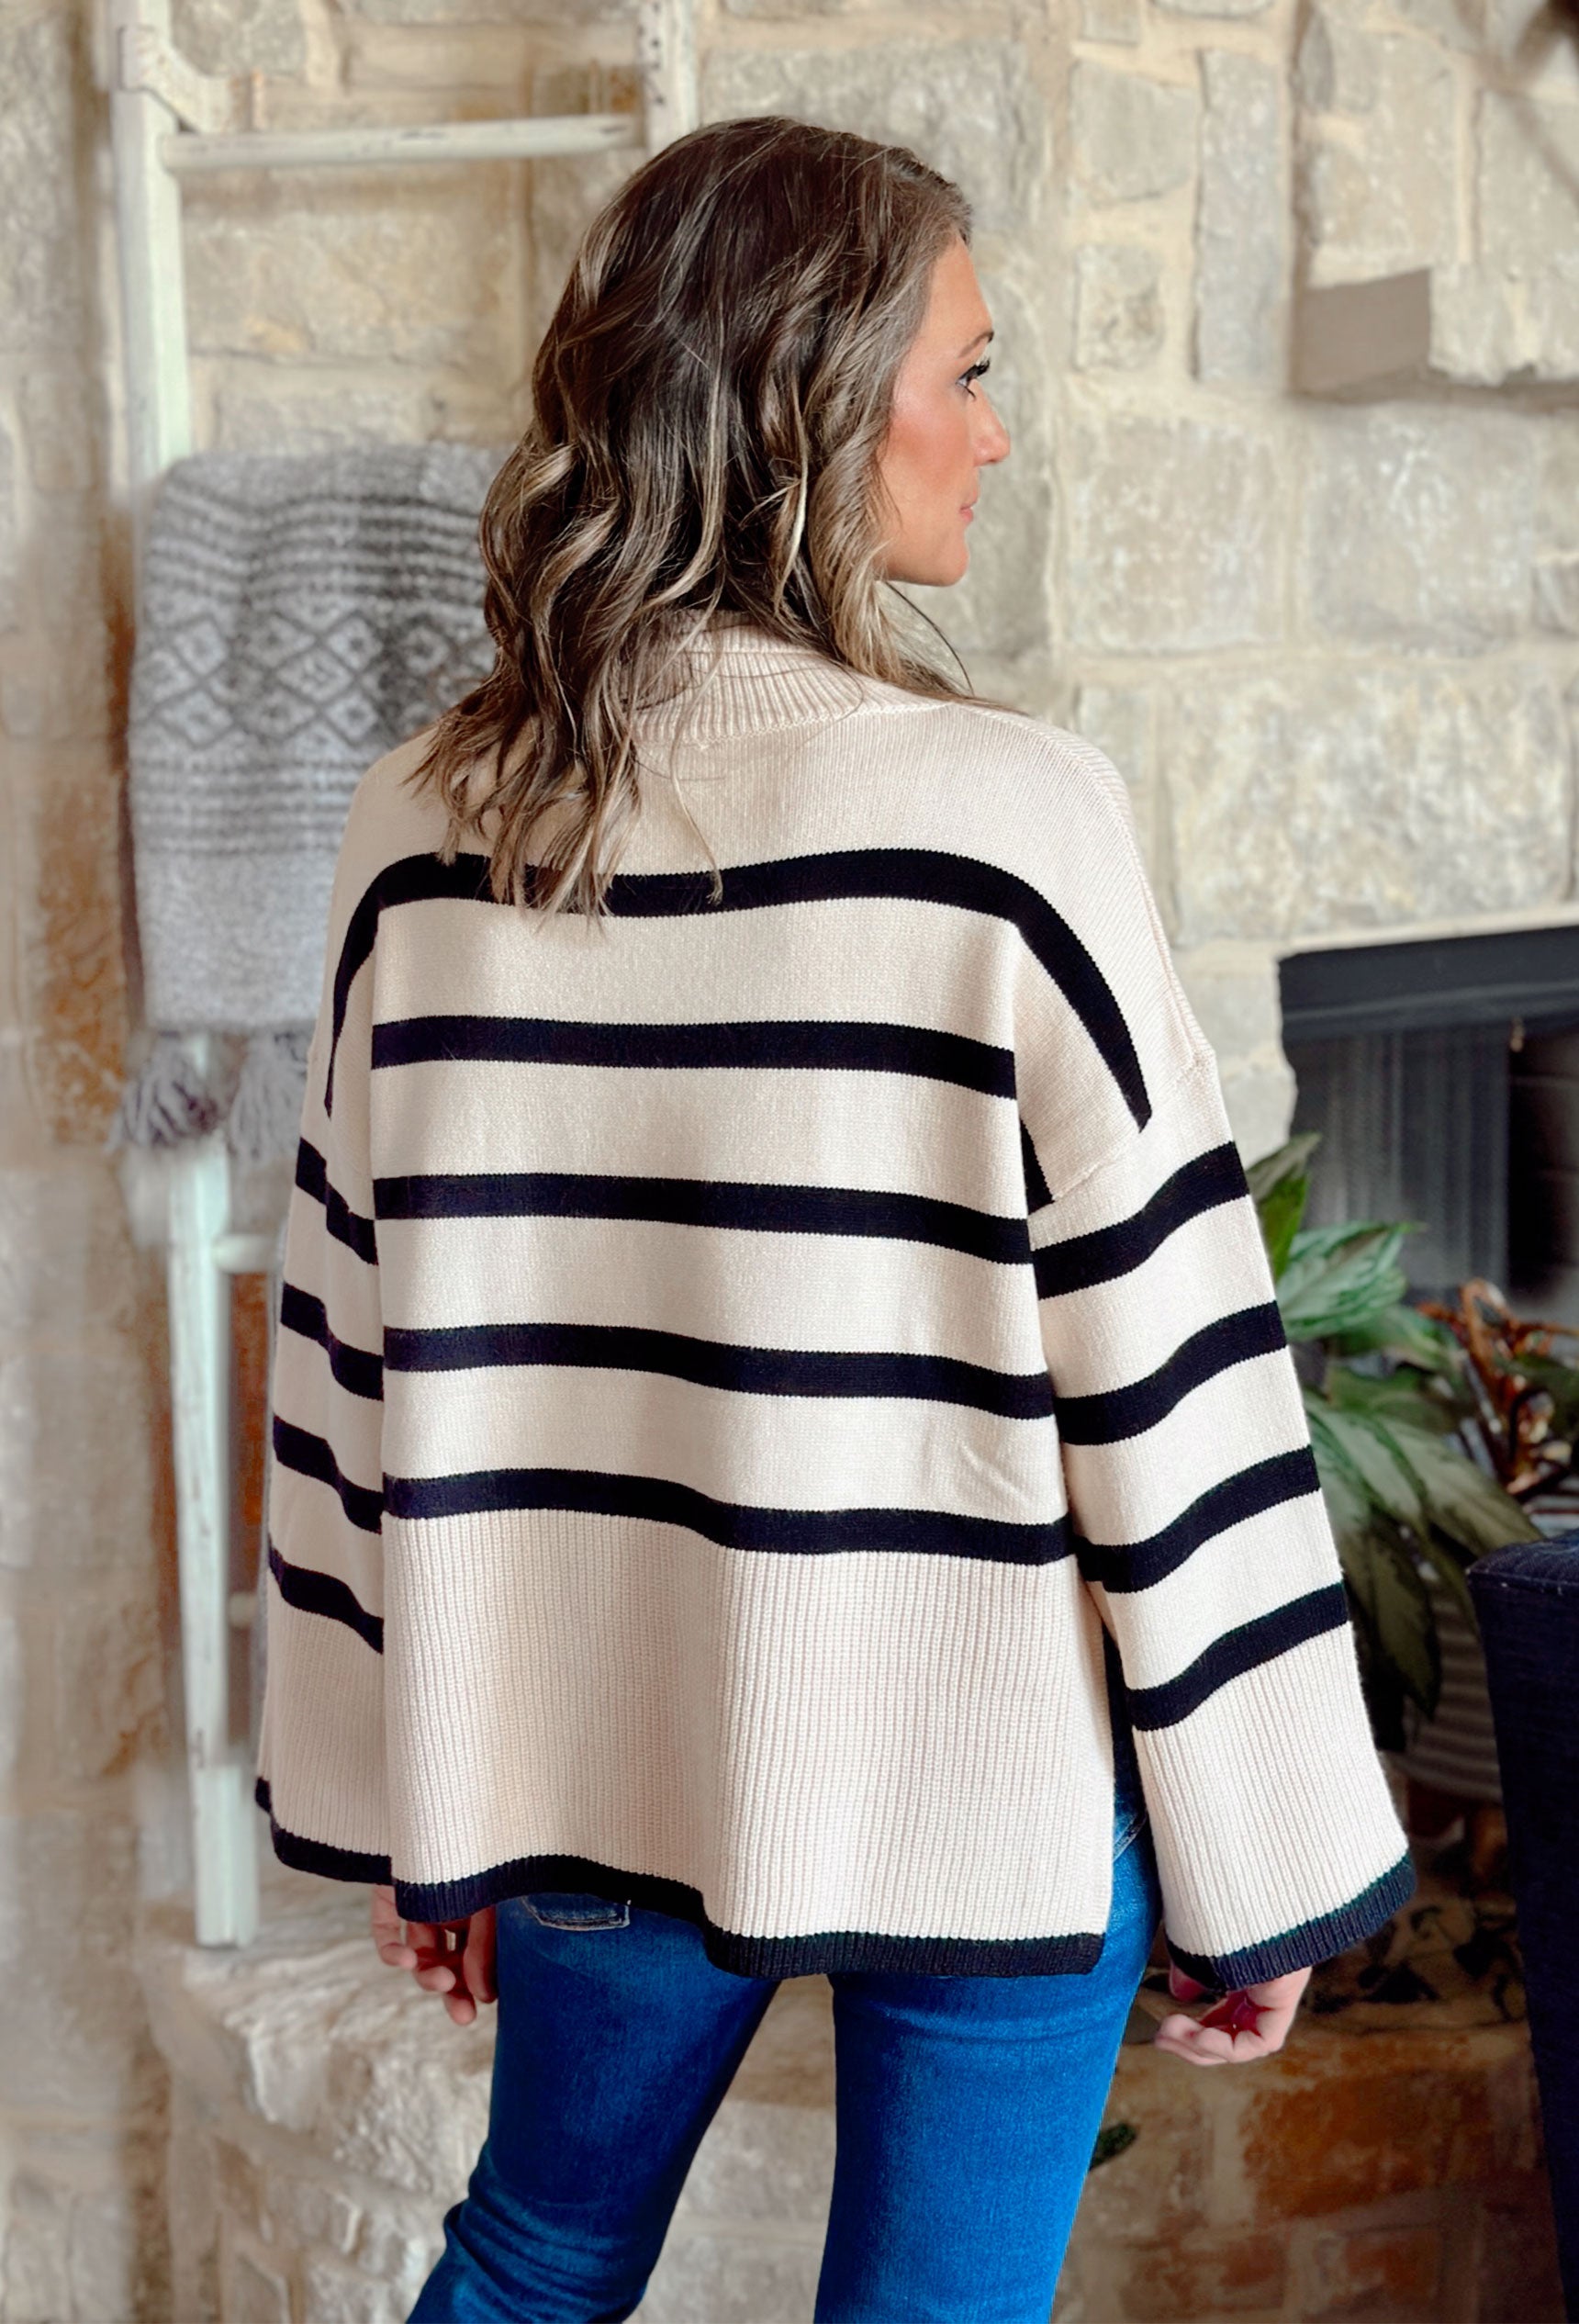 Cider in Soho Sweater, black and cream striped turtle neck sweater with wide sleeves and slits on the sides